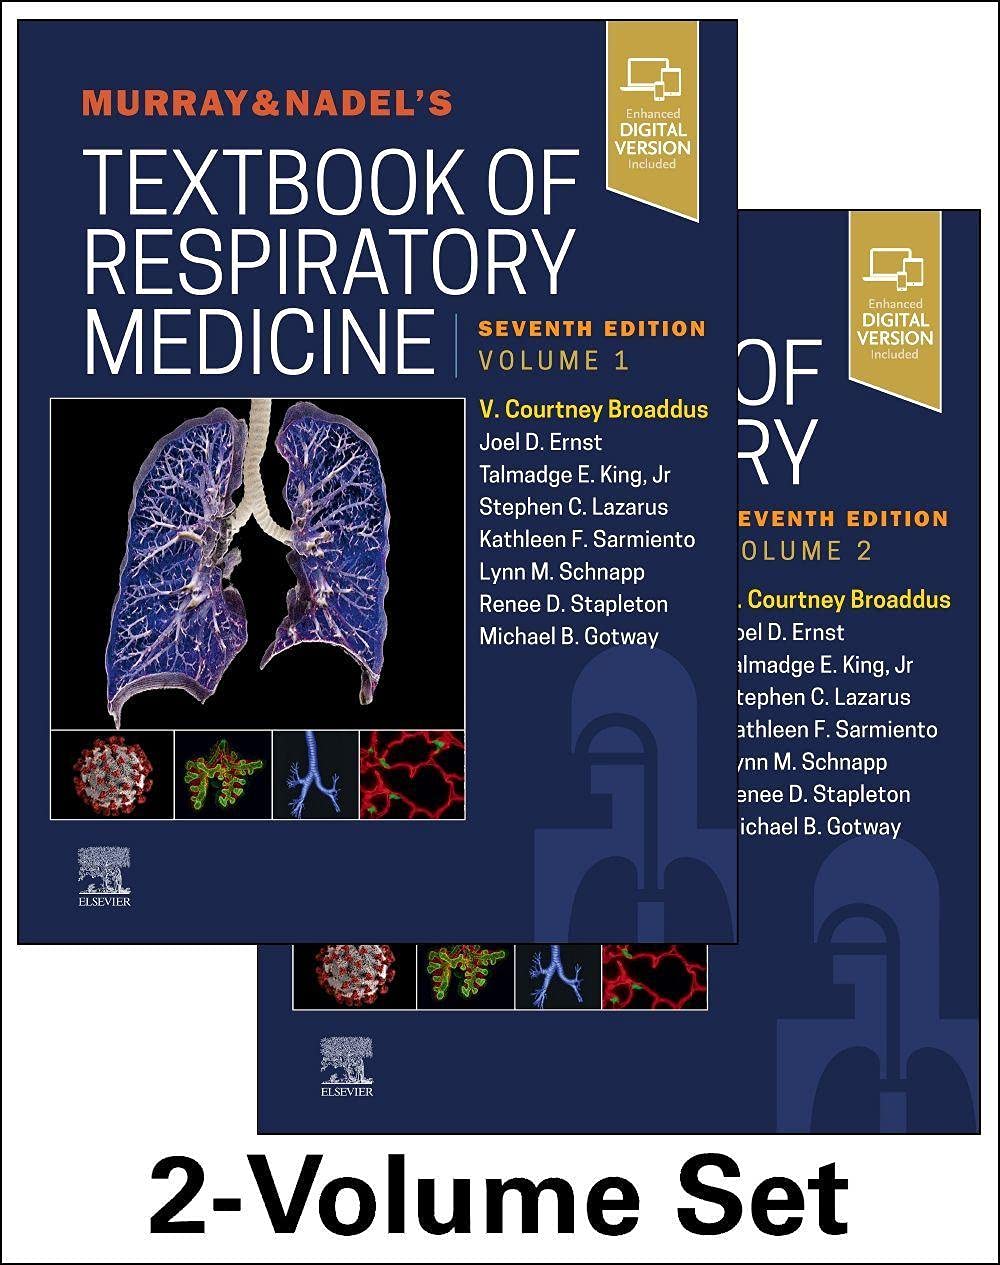 Murray and Nadel’s textbook of respiratory medicine